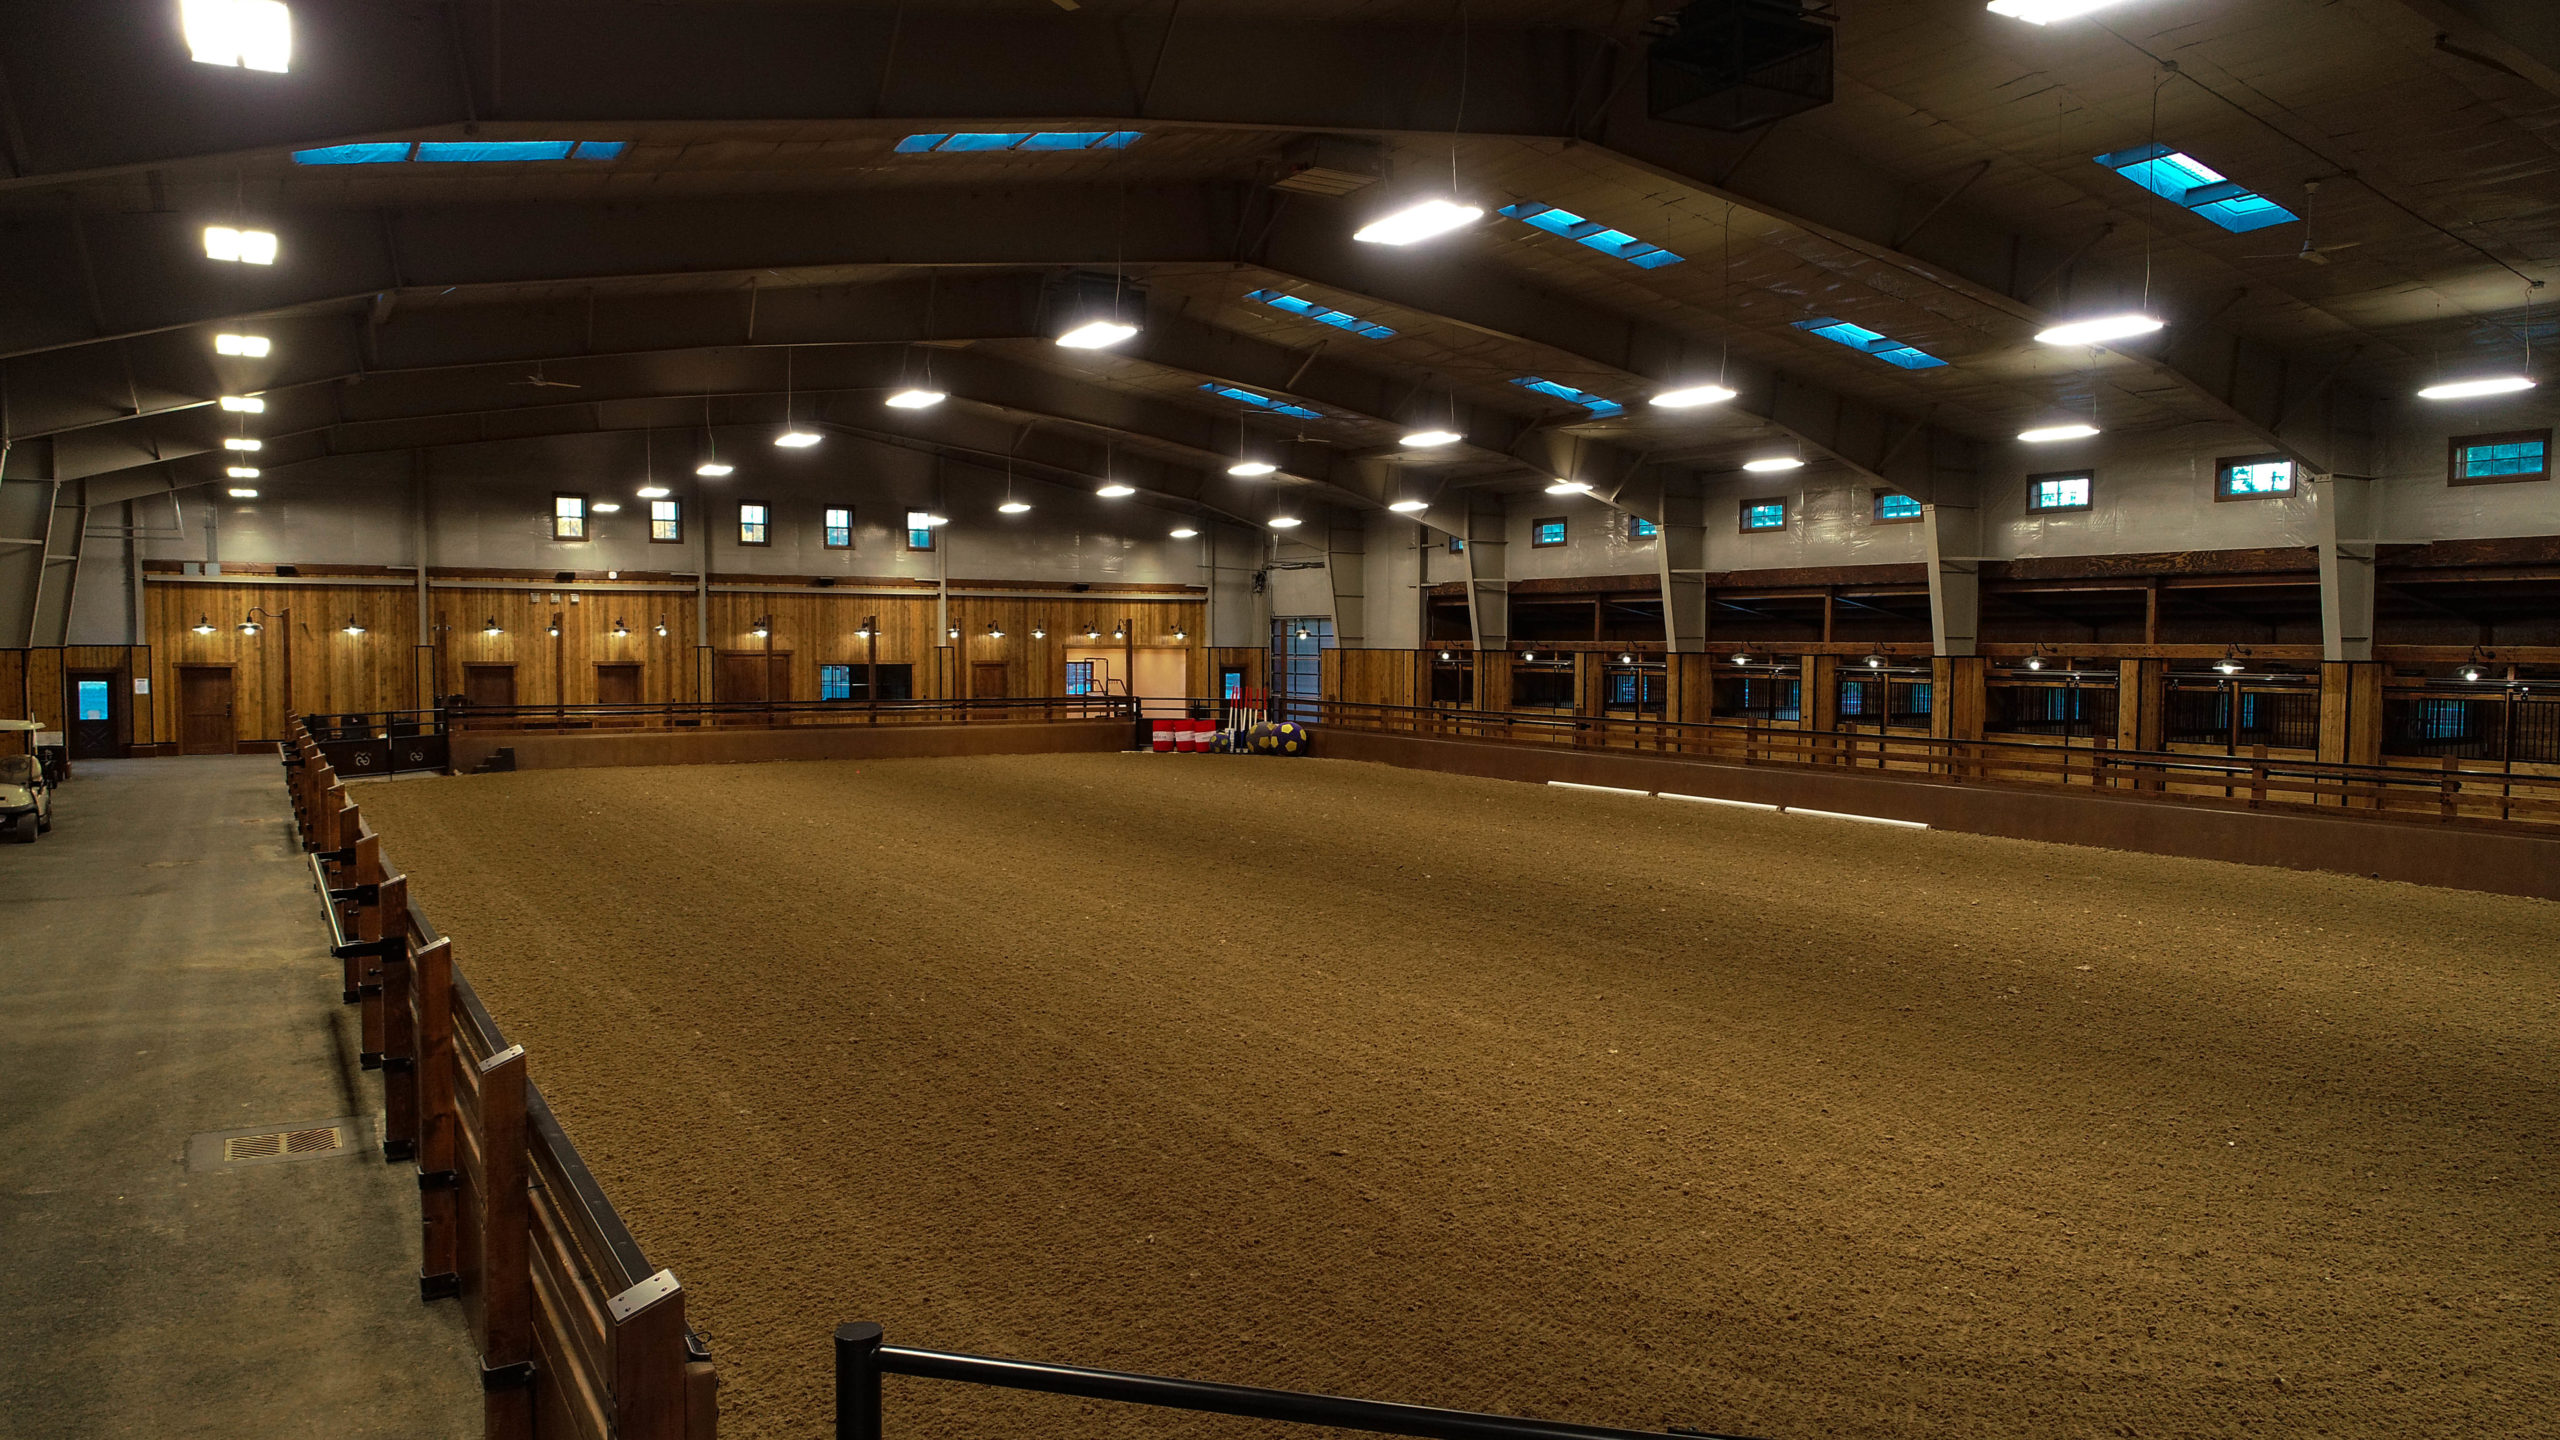 Rathdrum Barn and Riding Arenas